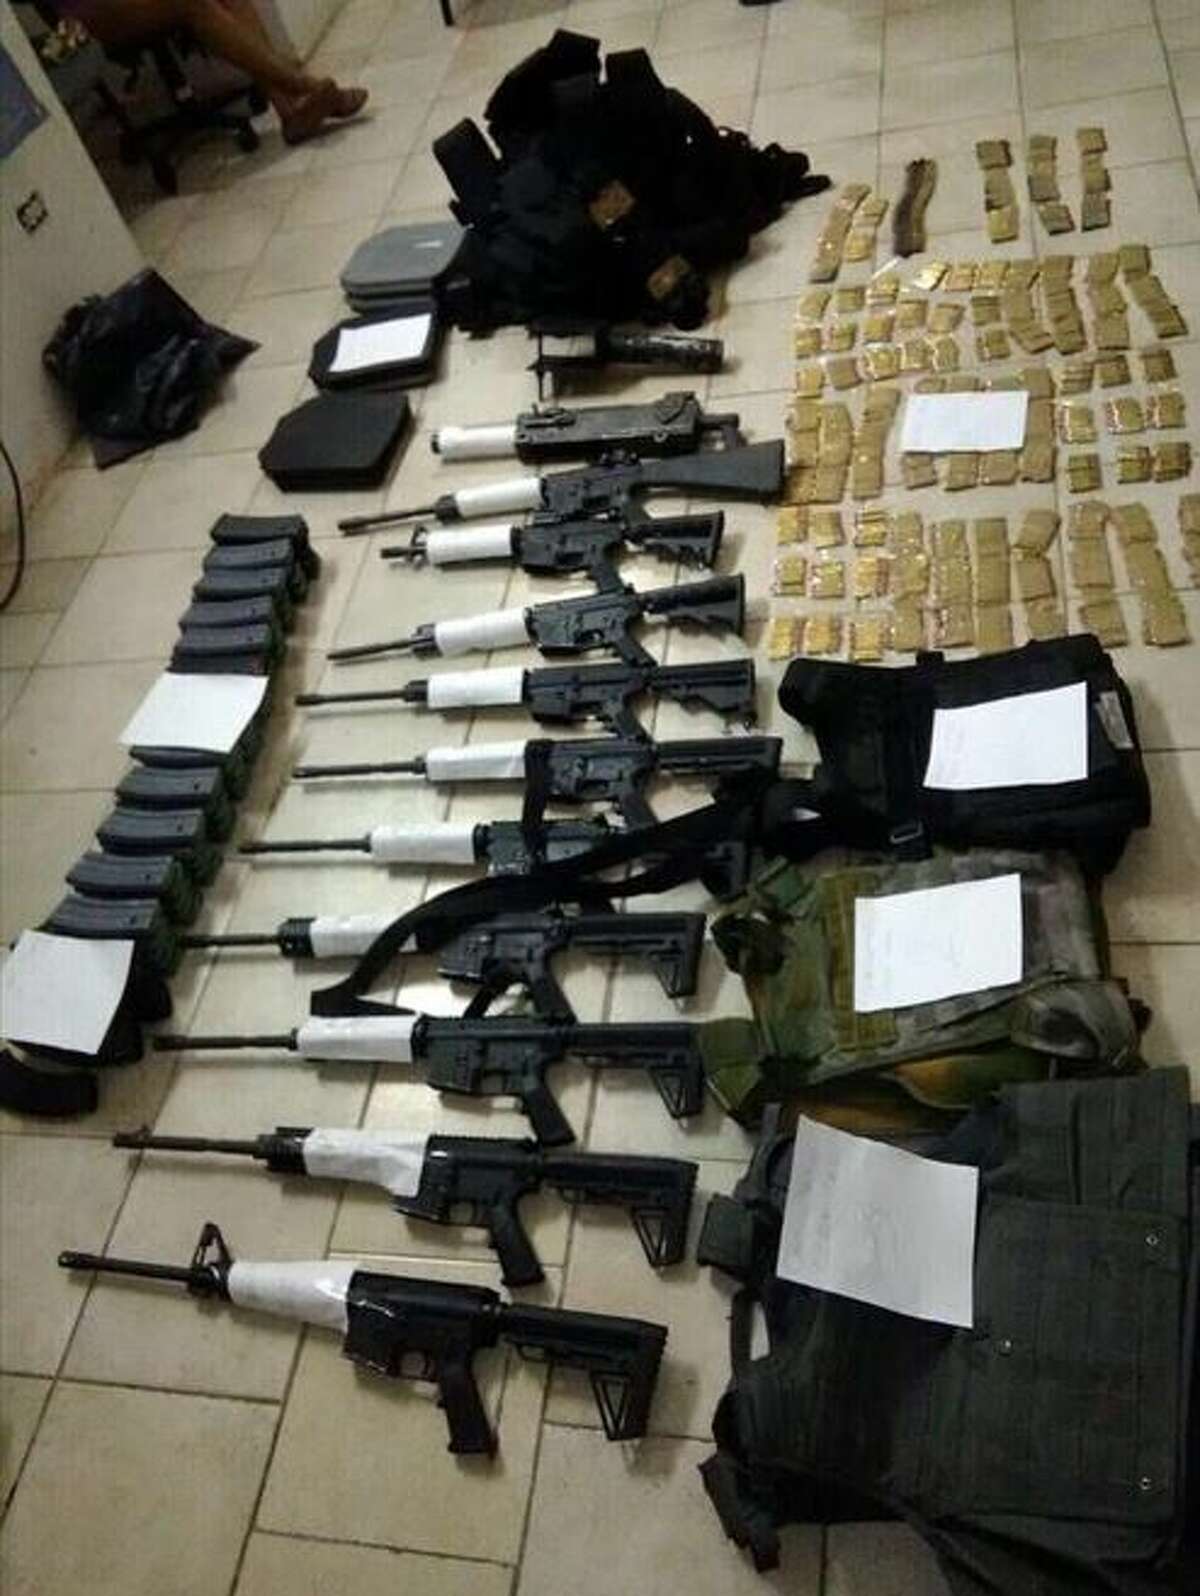 Mexican soldiers said they seized the weapons shown in this picture in Nuevo Laredo. Authorities also arrested five people in connection with the case.